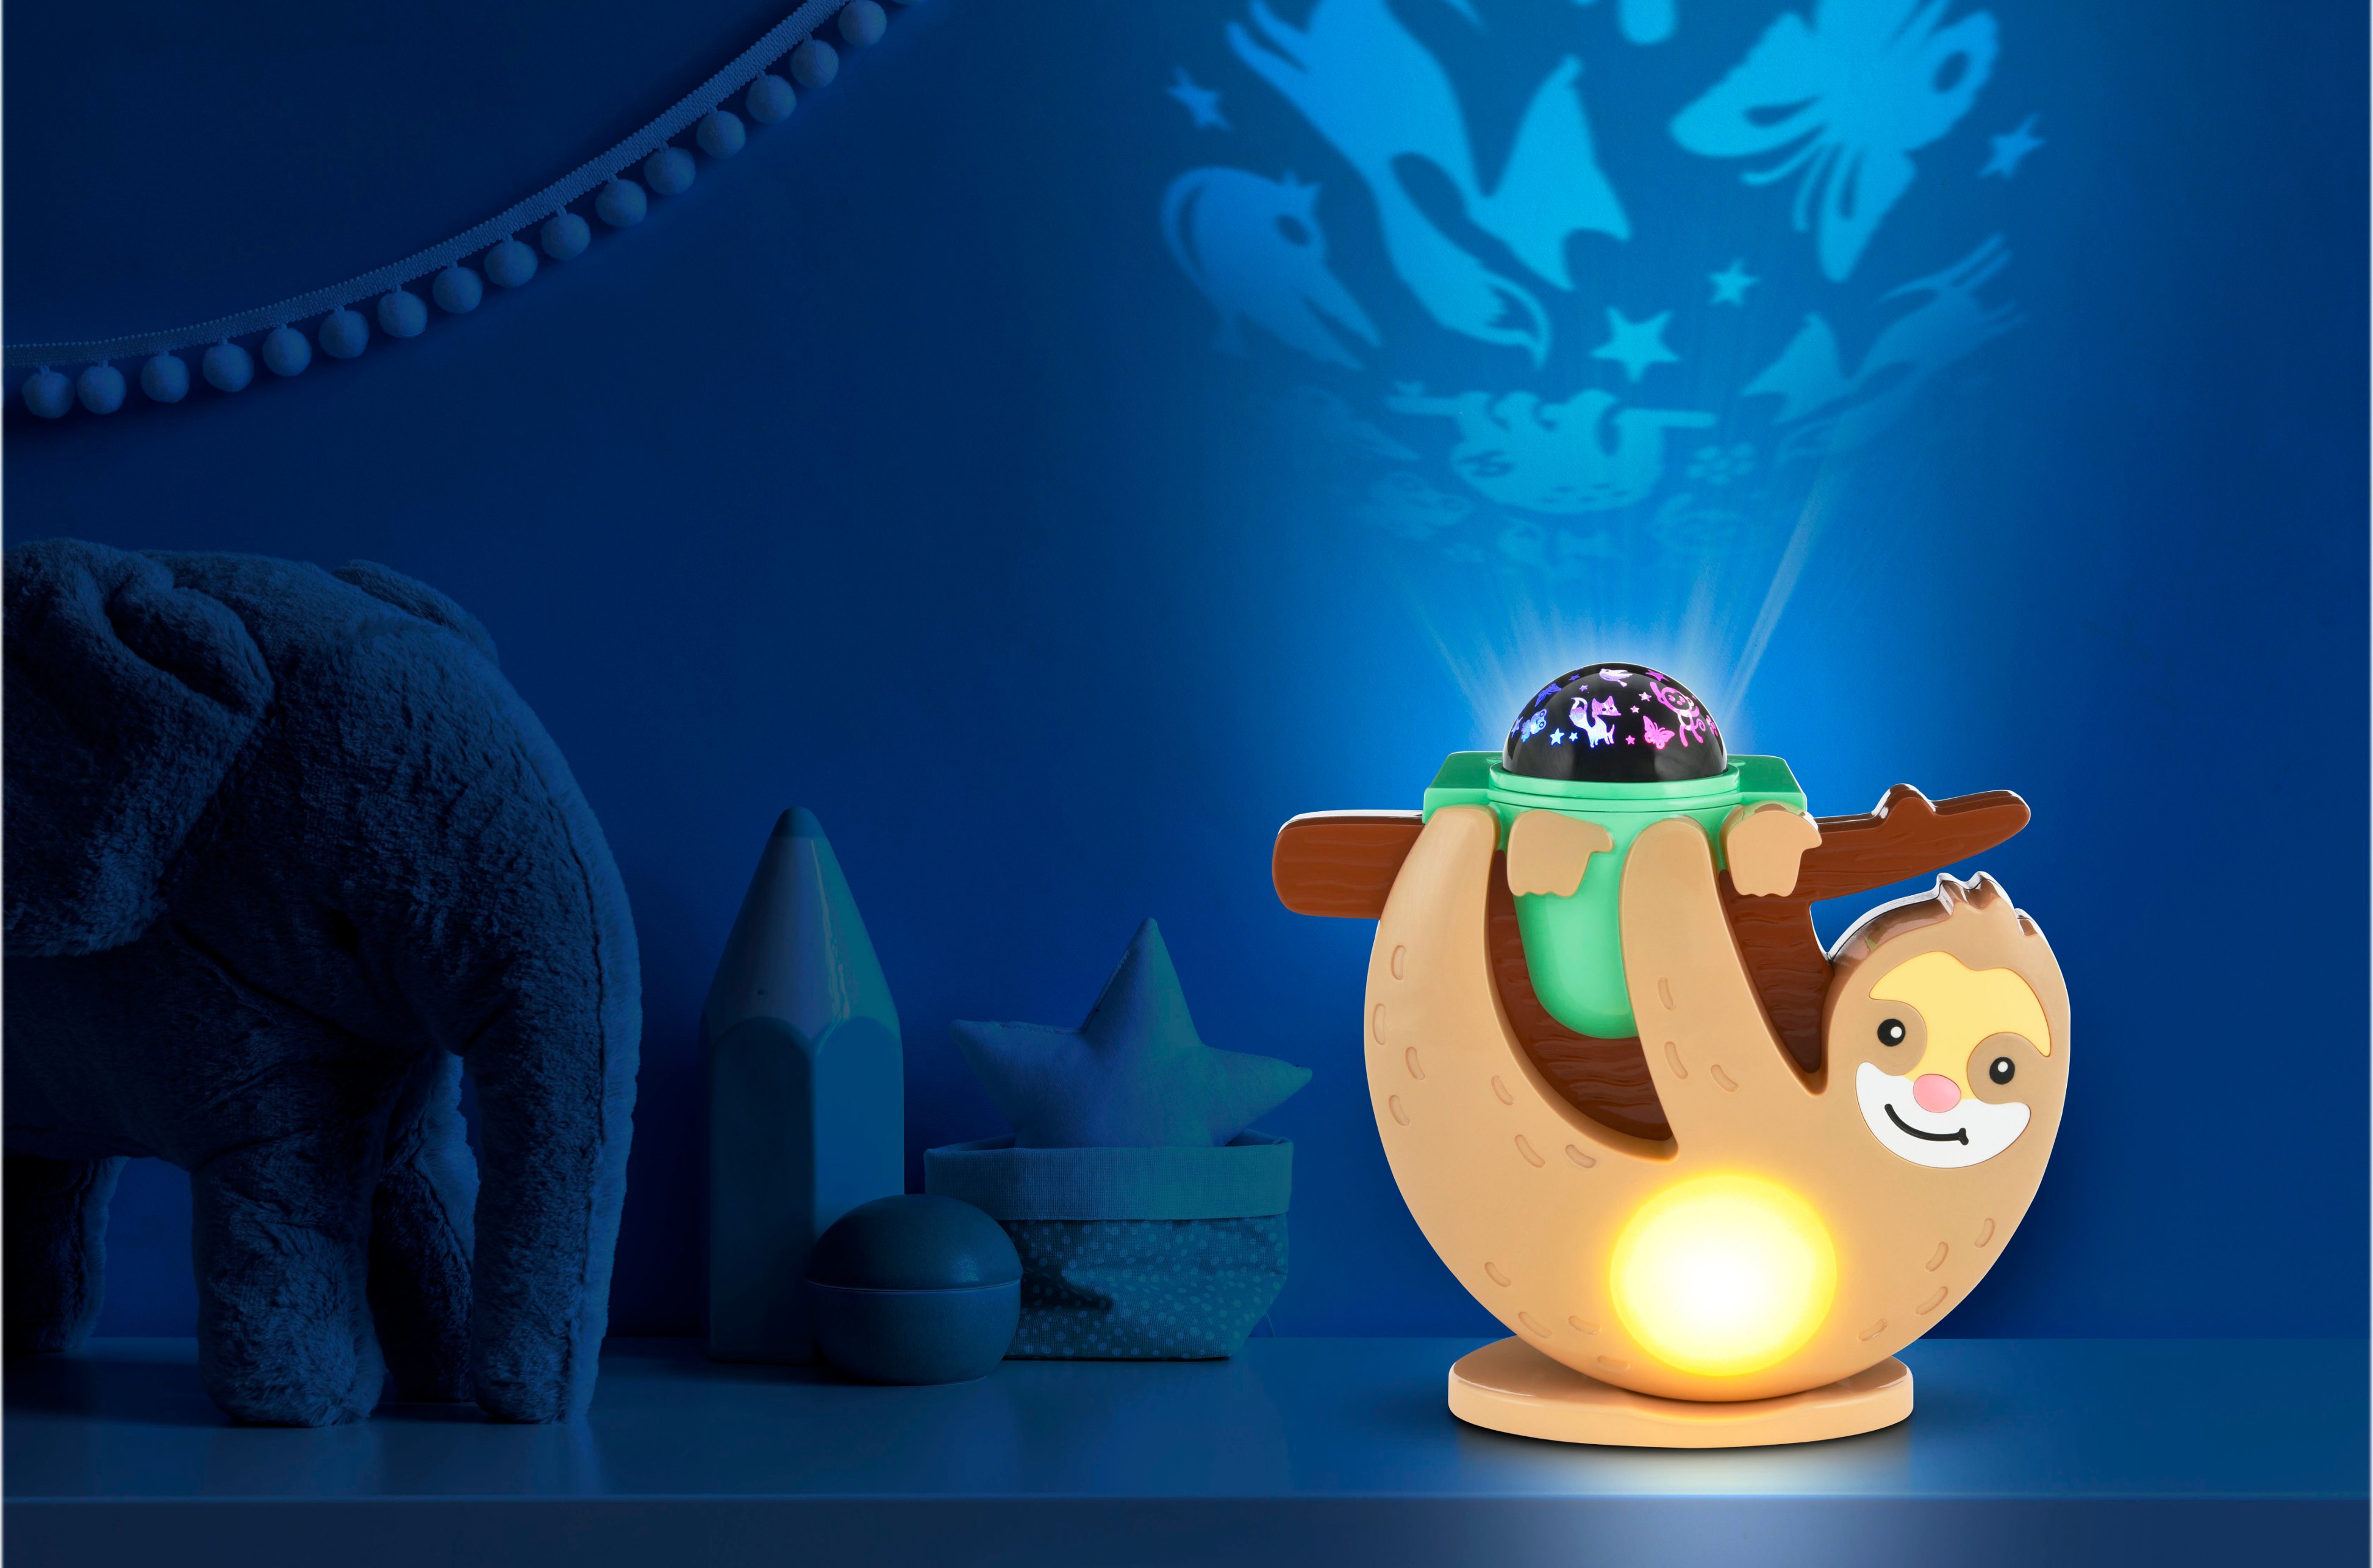 Soothing Sleep Elephant - With Starlight Projector Light